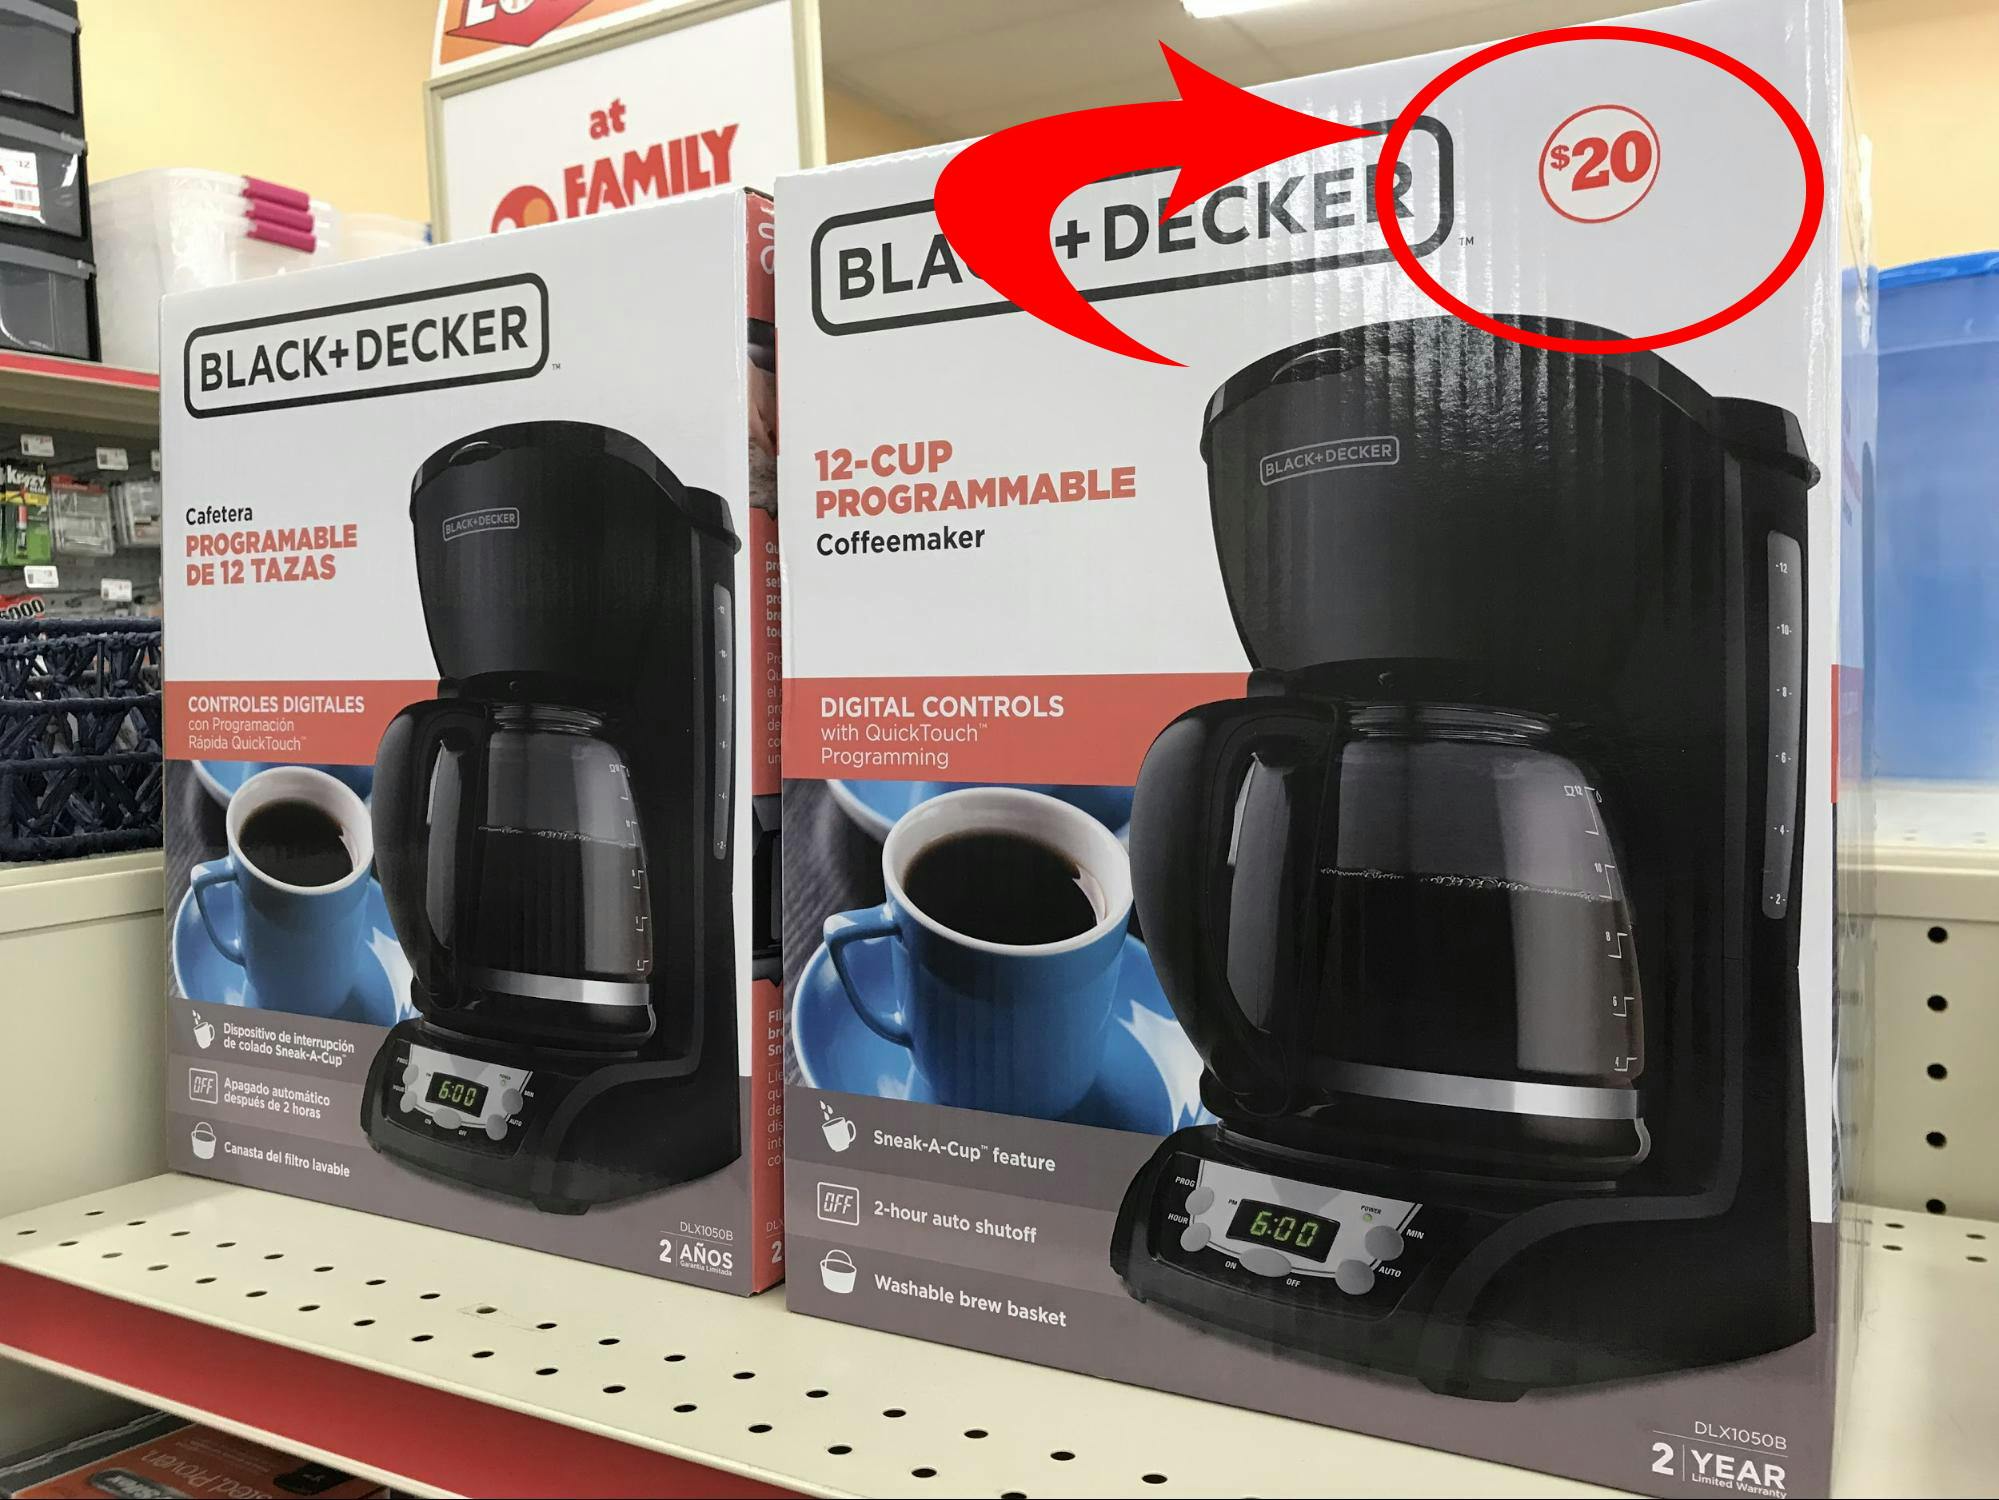 Black & Decker coffee maker with $20 price circled